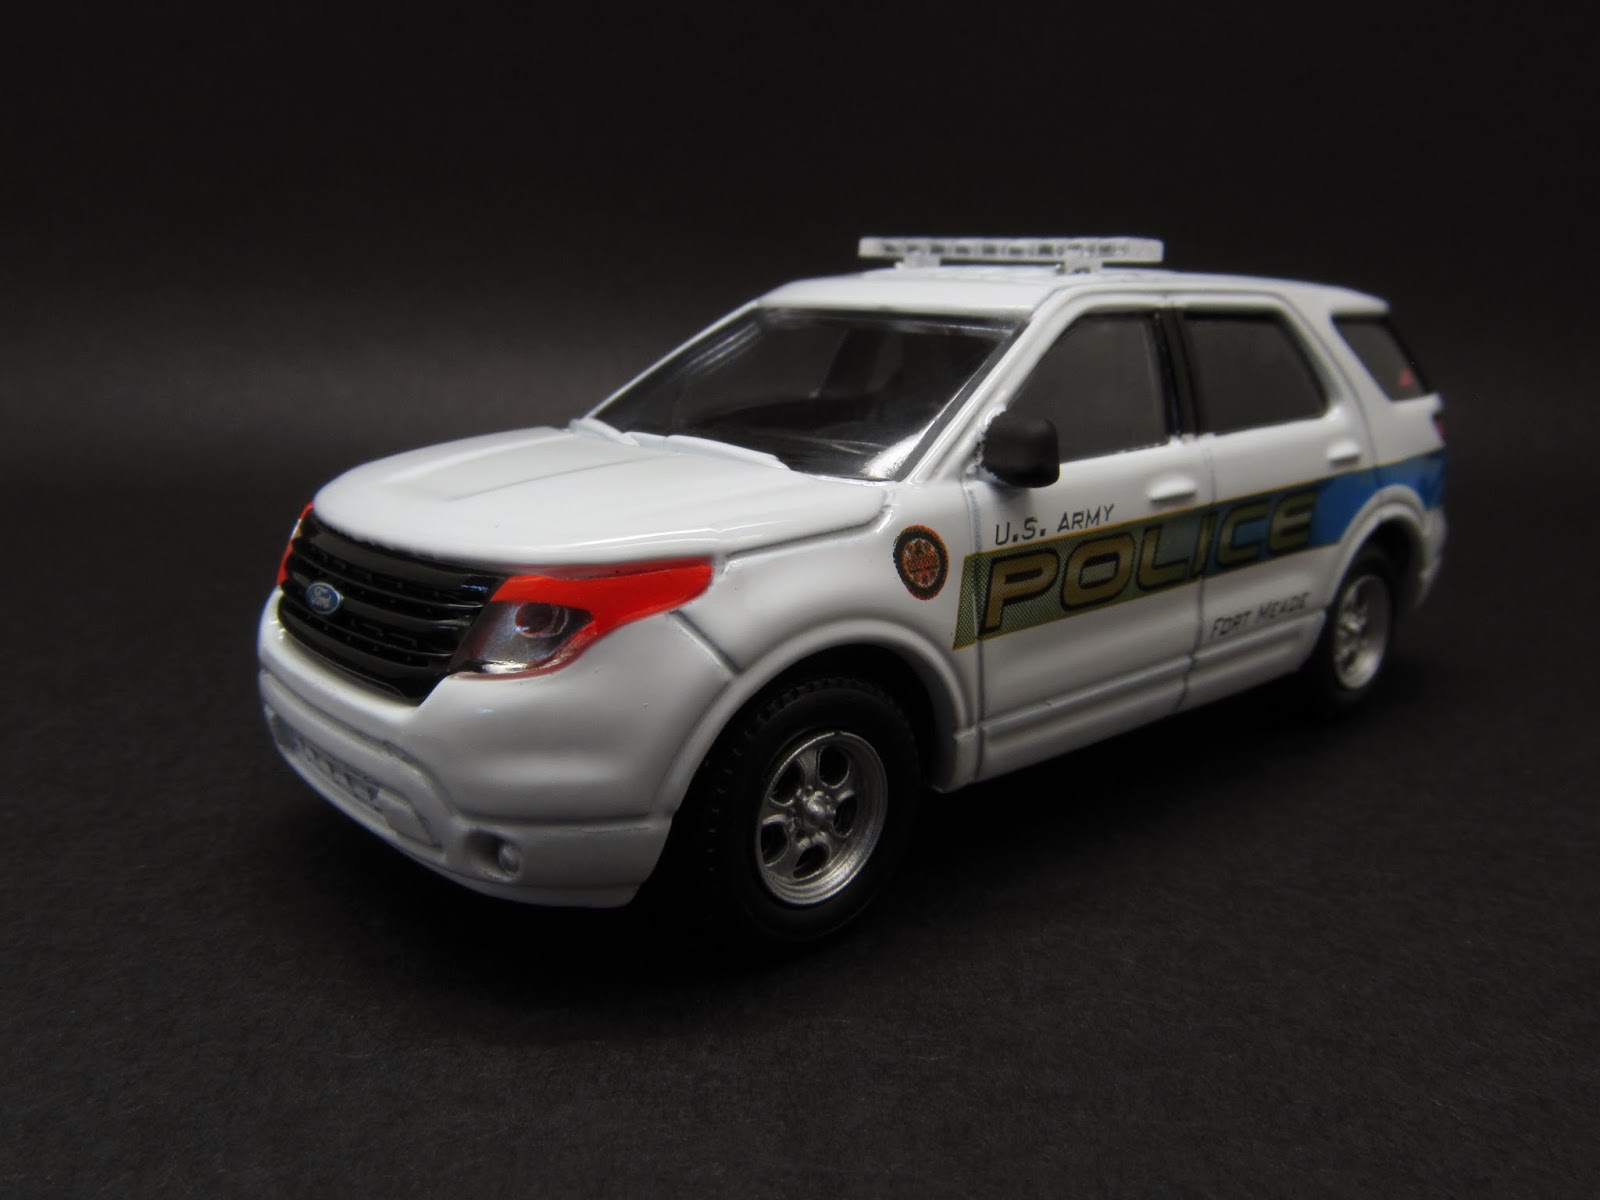 2012 Ford Explorer Police Interceptor US Army Fort Meade Maryland Military ...